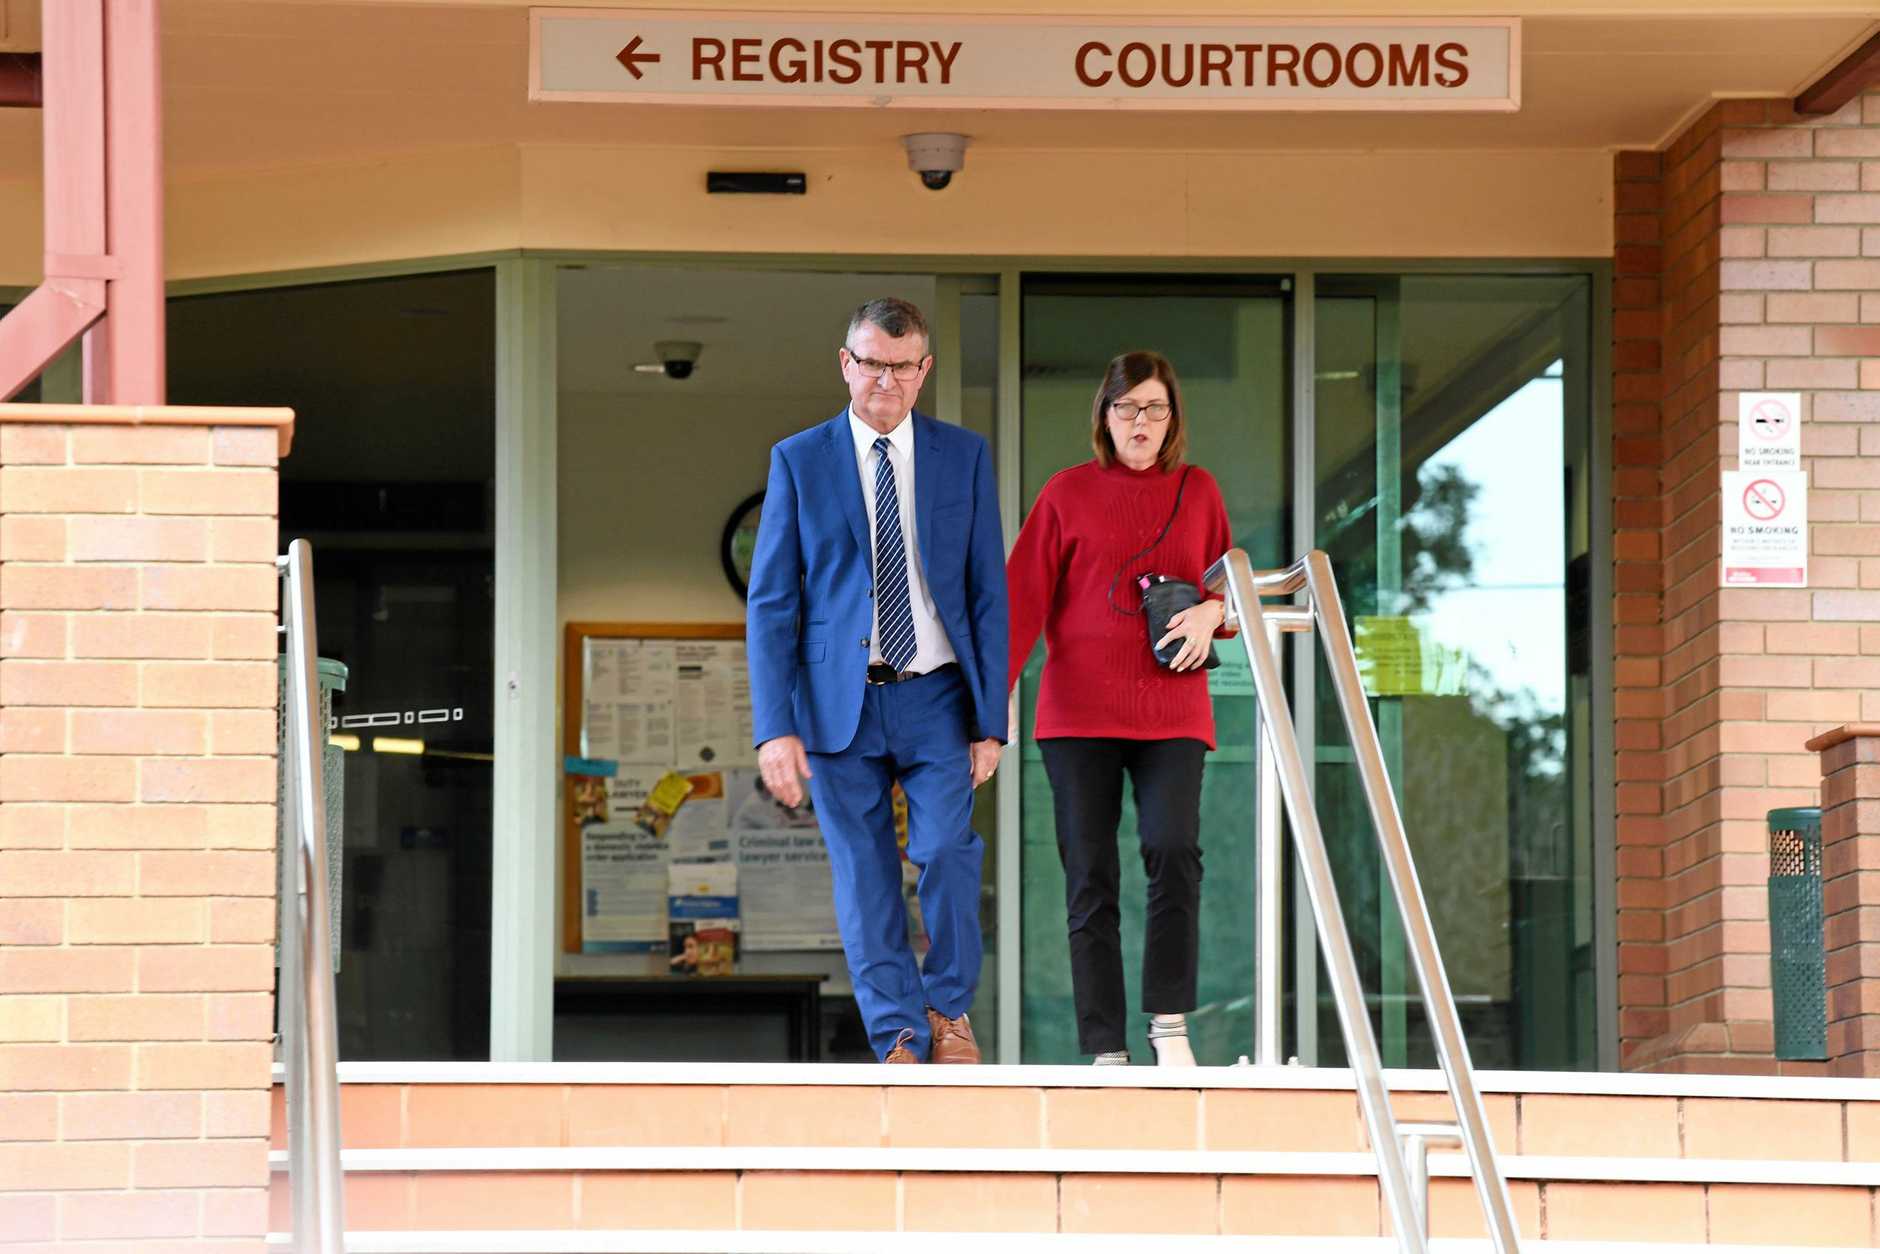 Patrick O'Sullivan with his wife leaving Hervey Bay District Court (29.07.19) after he received two sentences of 2.5 years imprisonment suspended for four years for each count of extortion.